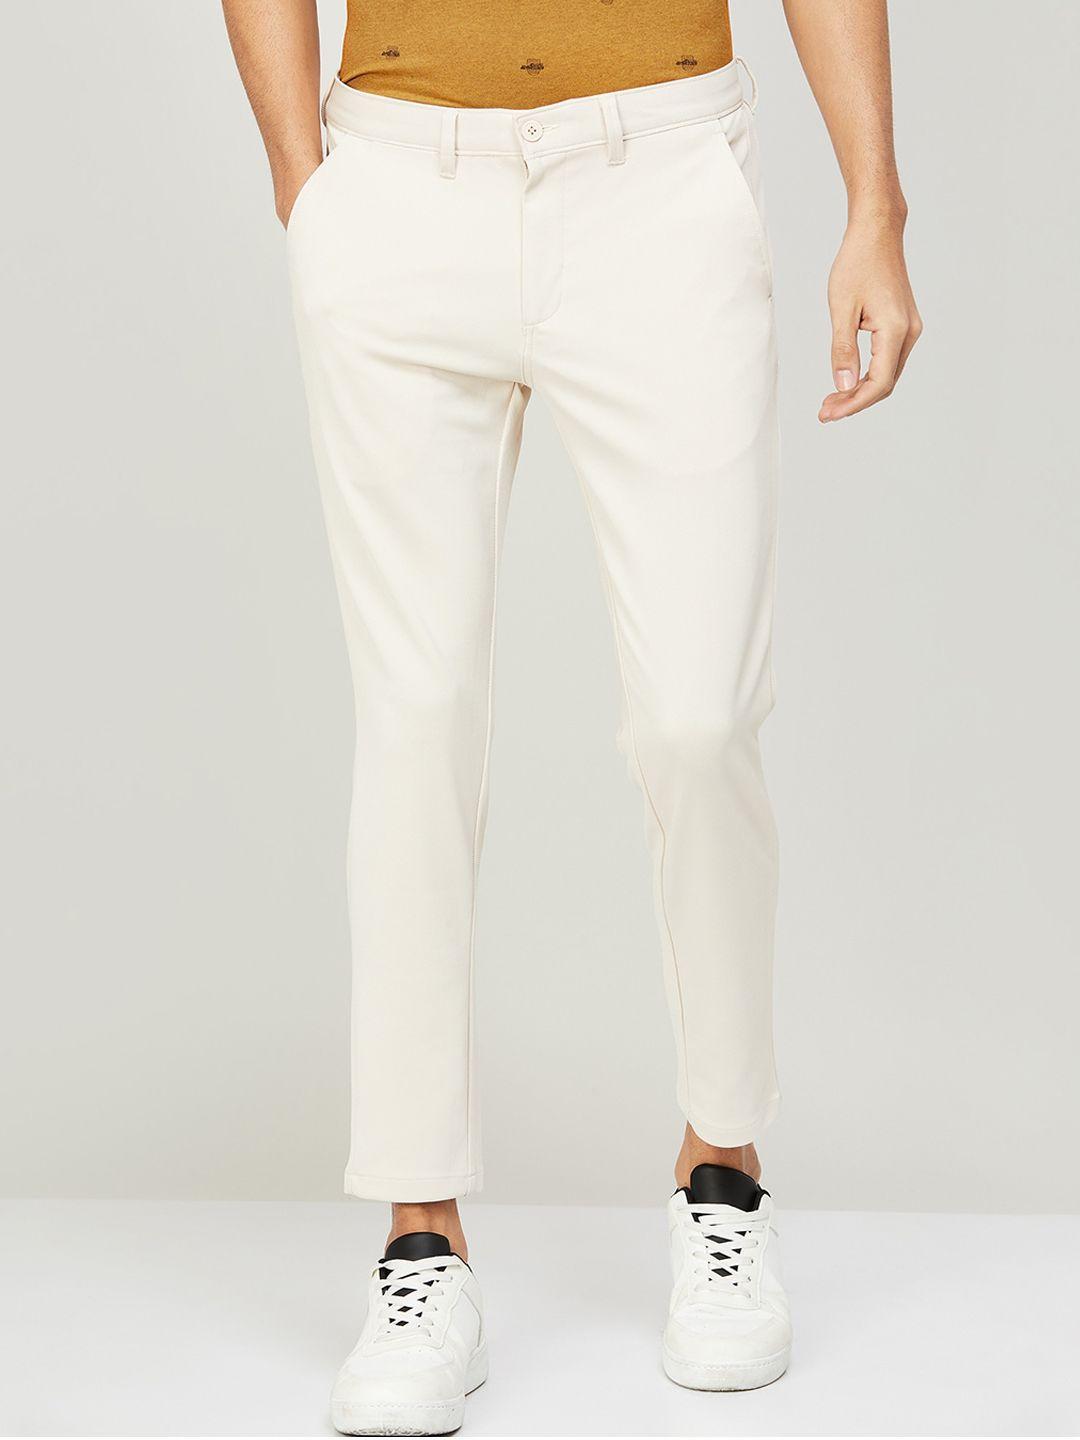 code by lifestyle men mid rise ciggarette trousers